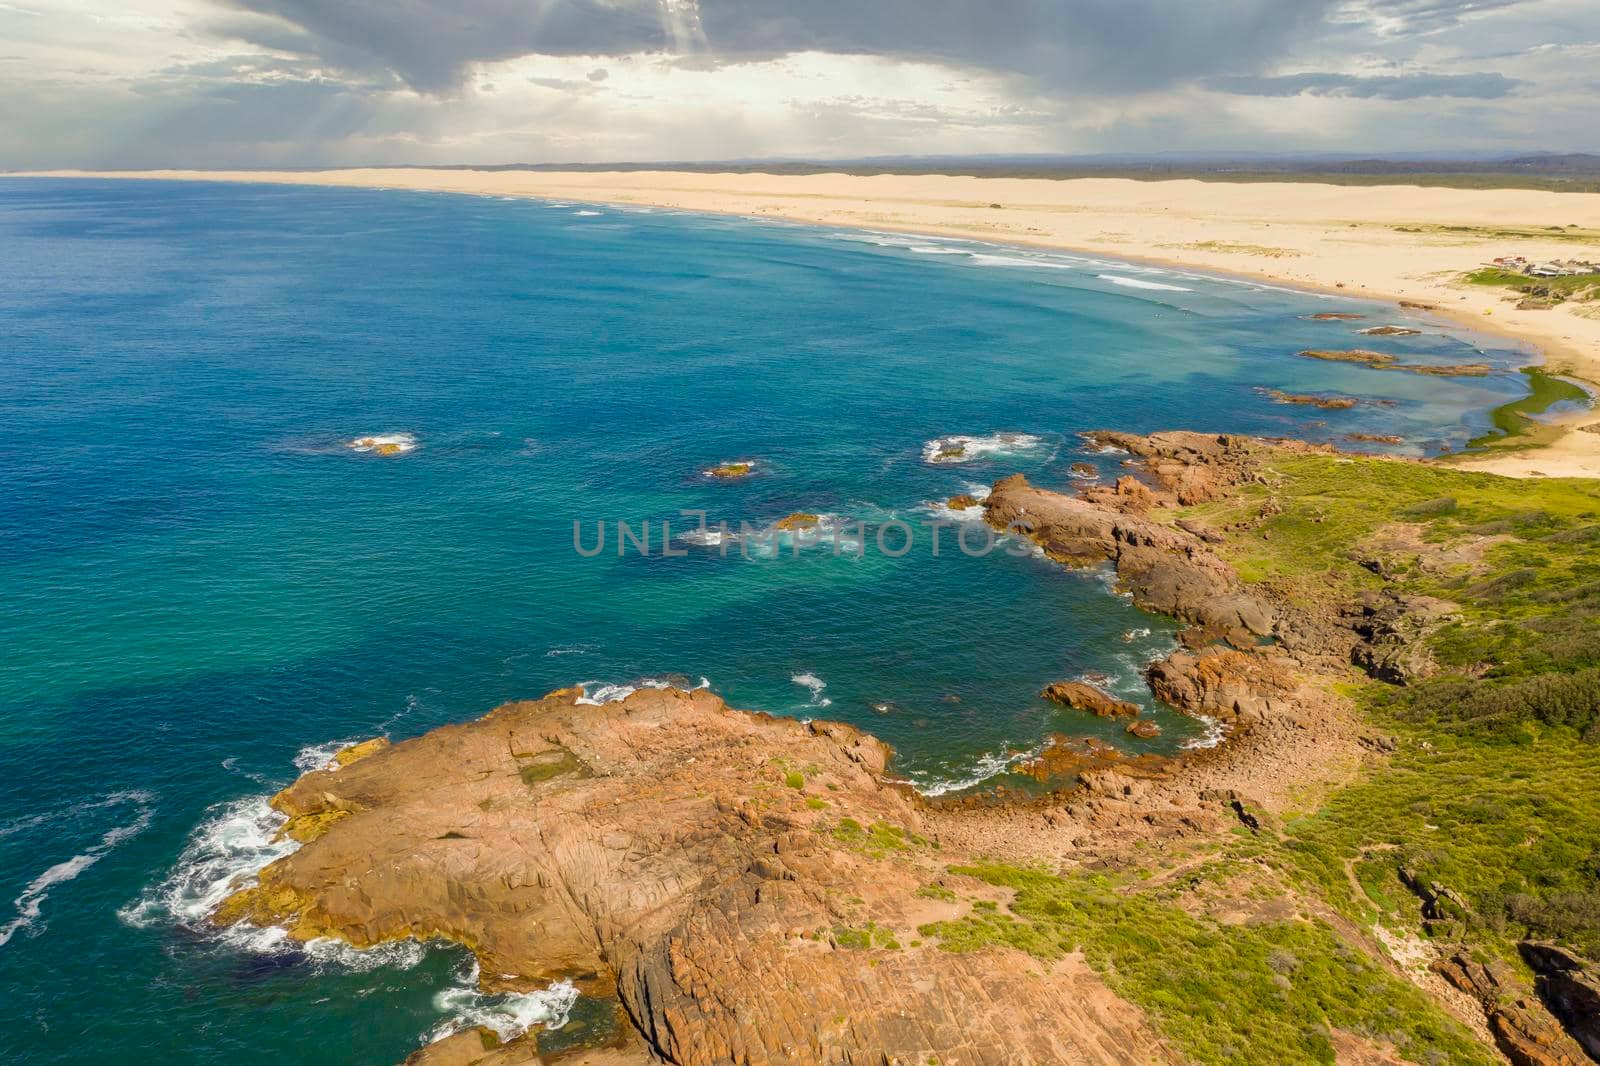 Aerial view of the Stockton Sand Dunes and blue water of the Tasman Sea at Birubi Point near Port Stephens in regional New South Wales in Australia